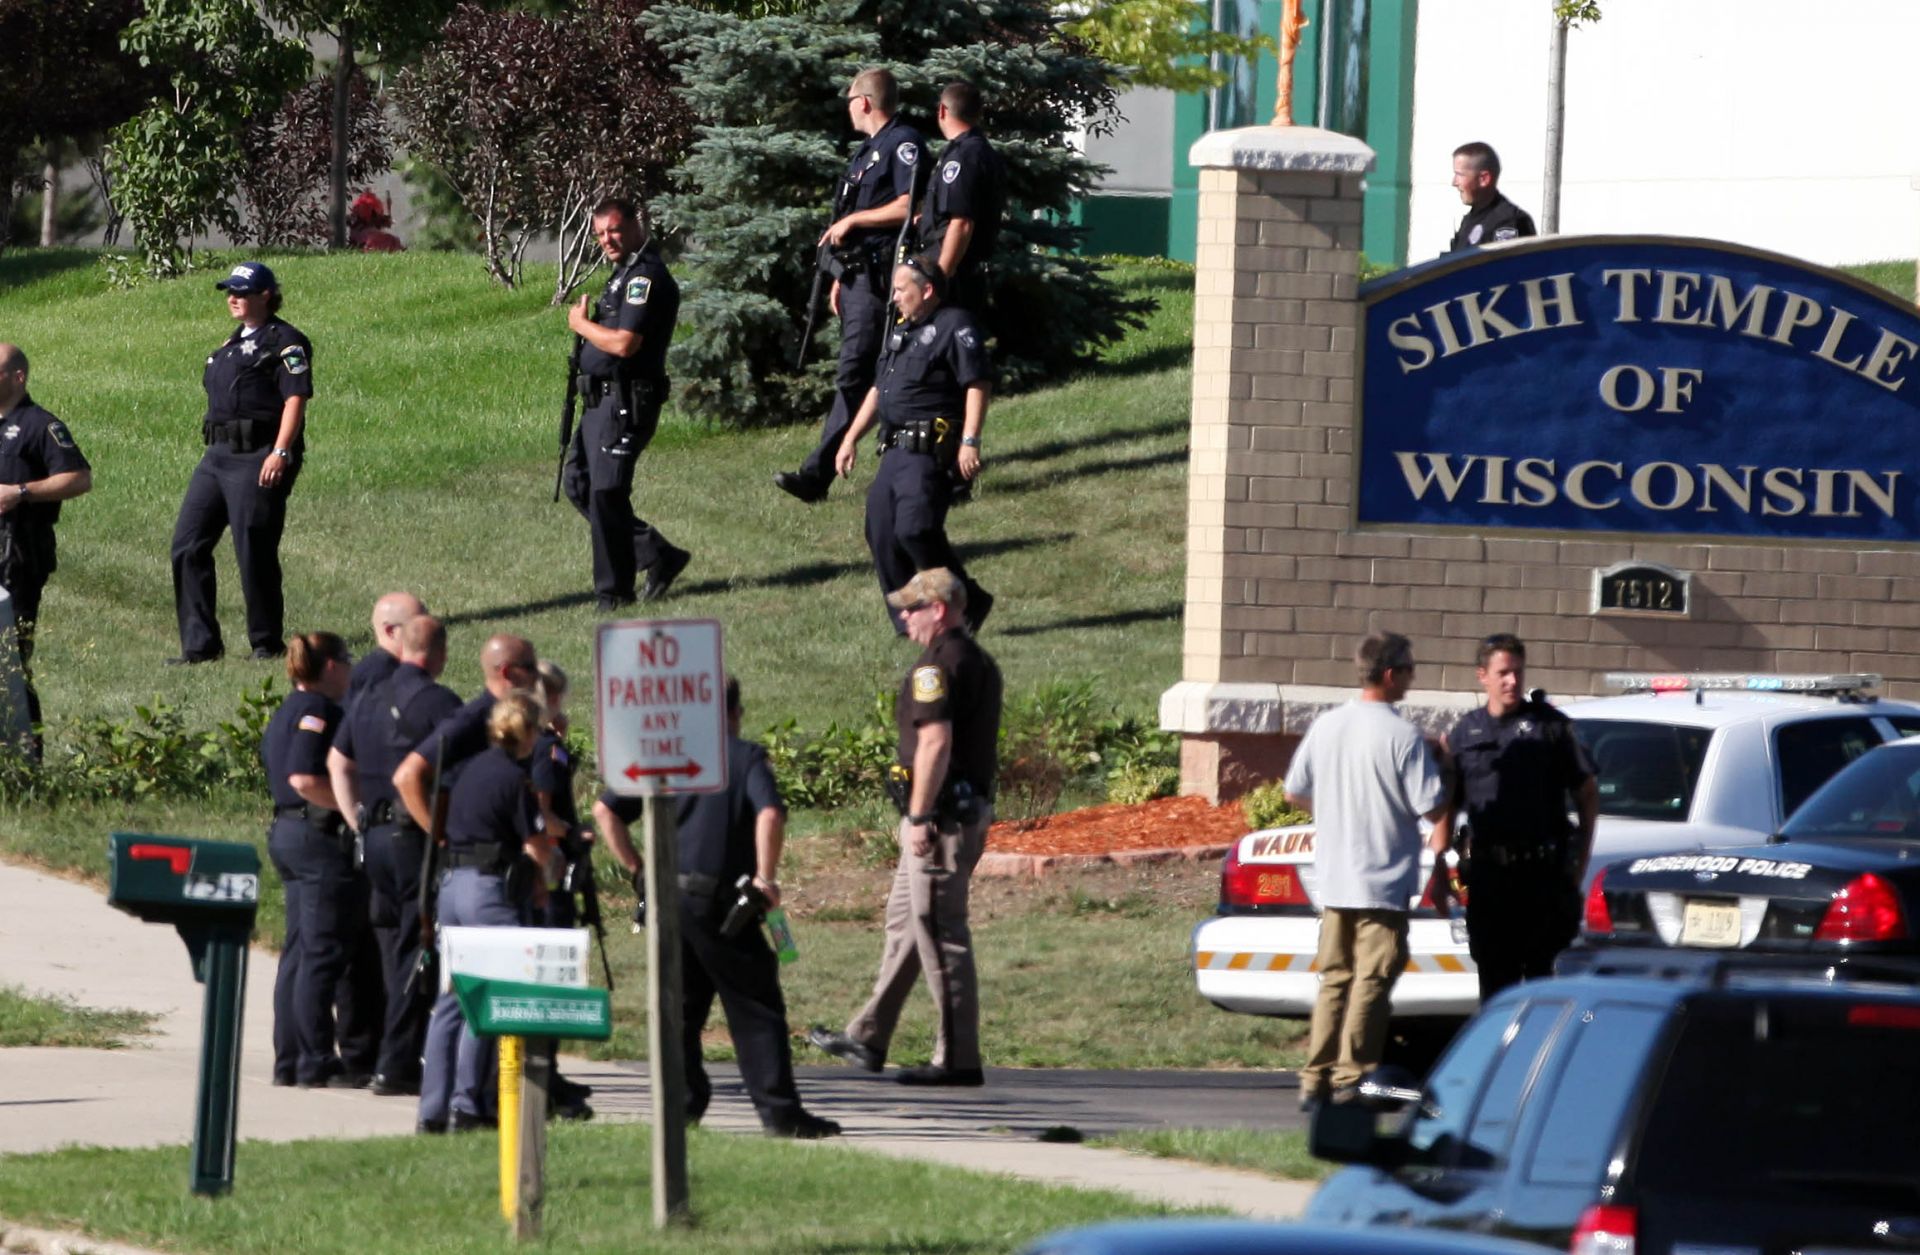 Law enforcement personnel outside the Sikh Temple of Wisconsin after a gunman fired upon people at a service there on Aug. 5, 2012, in Oak Creek, Wisconsin.